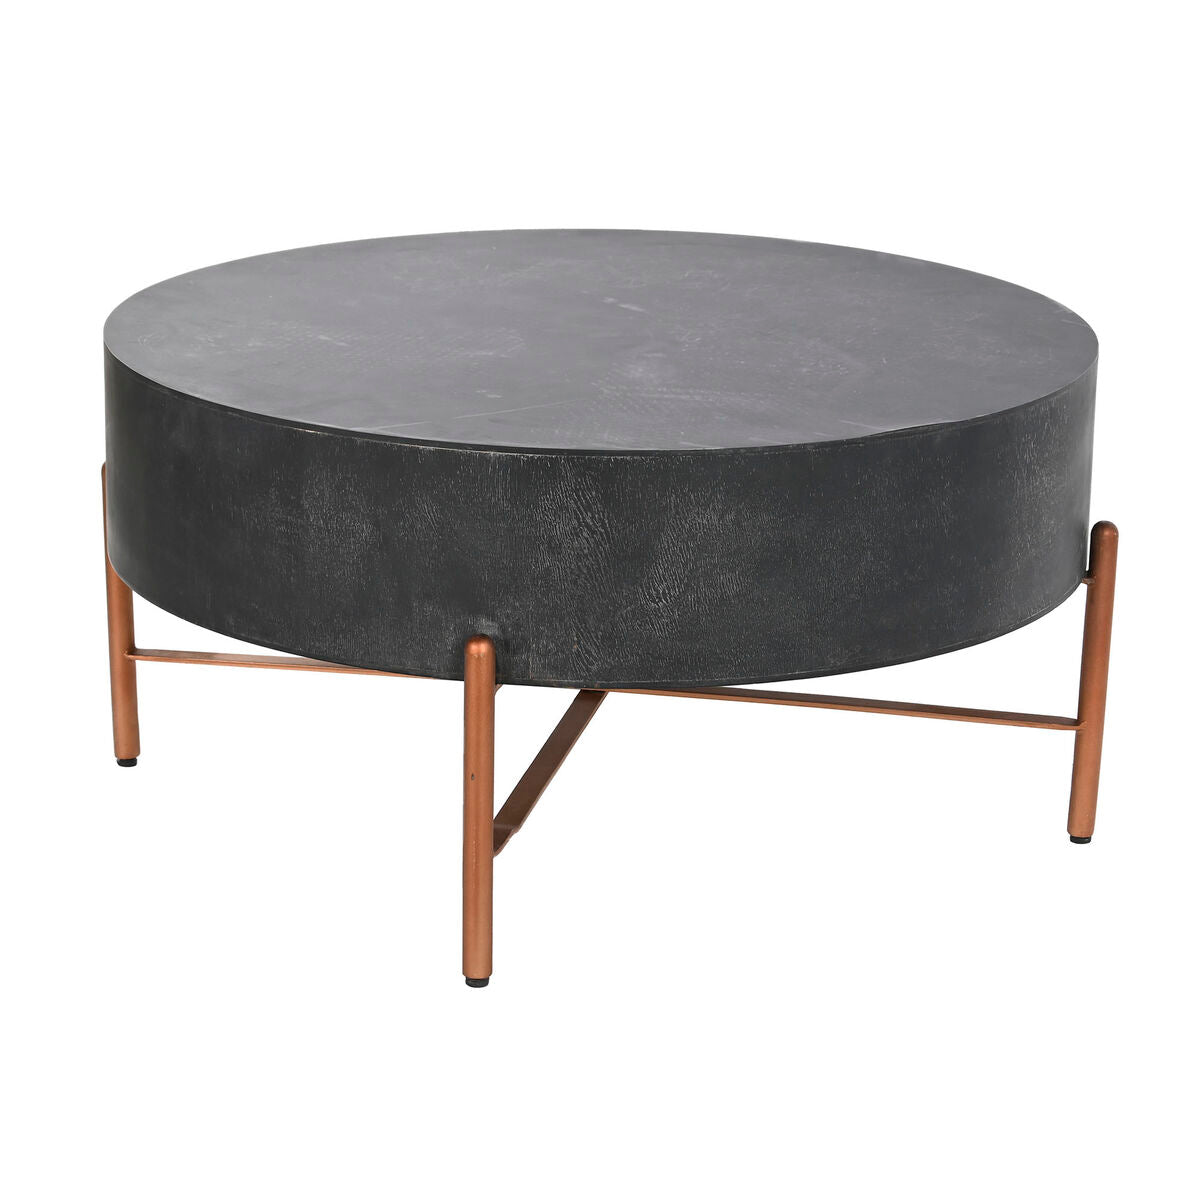 Black Centre Table in Mango wood and Bronze Metal Legs (90 x 90 x 45 cm)